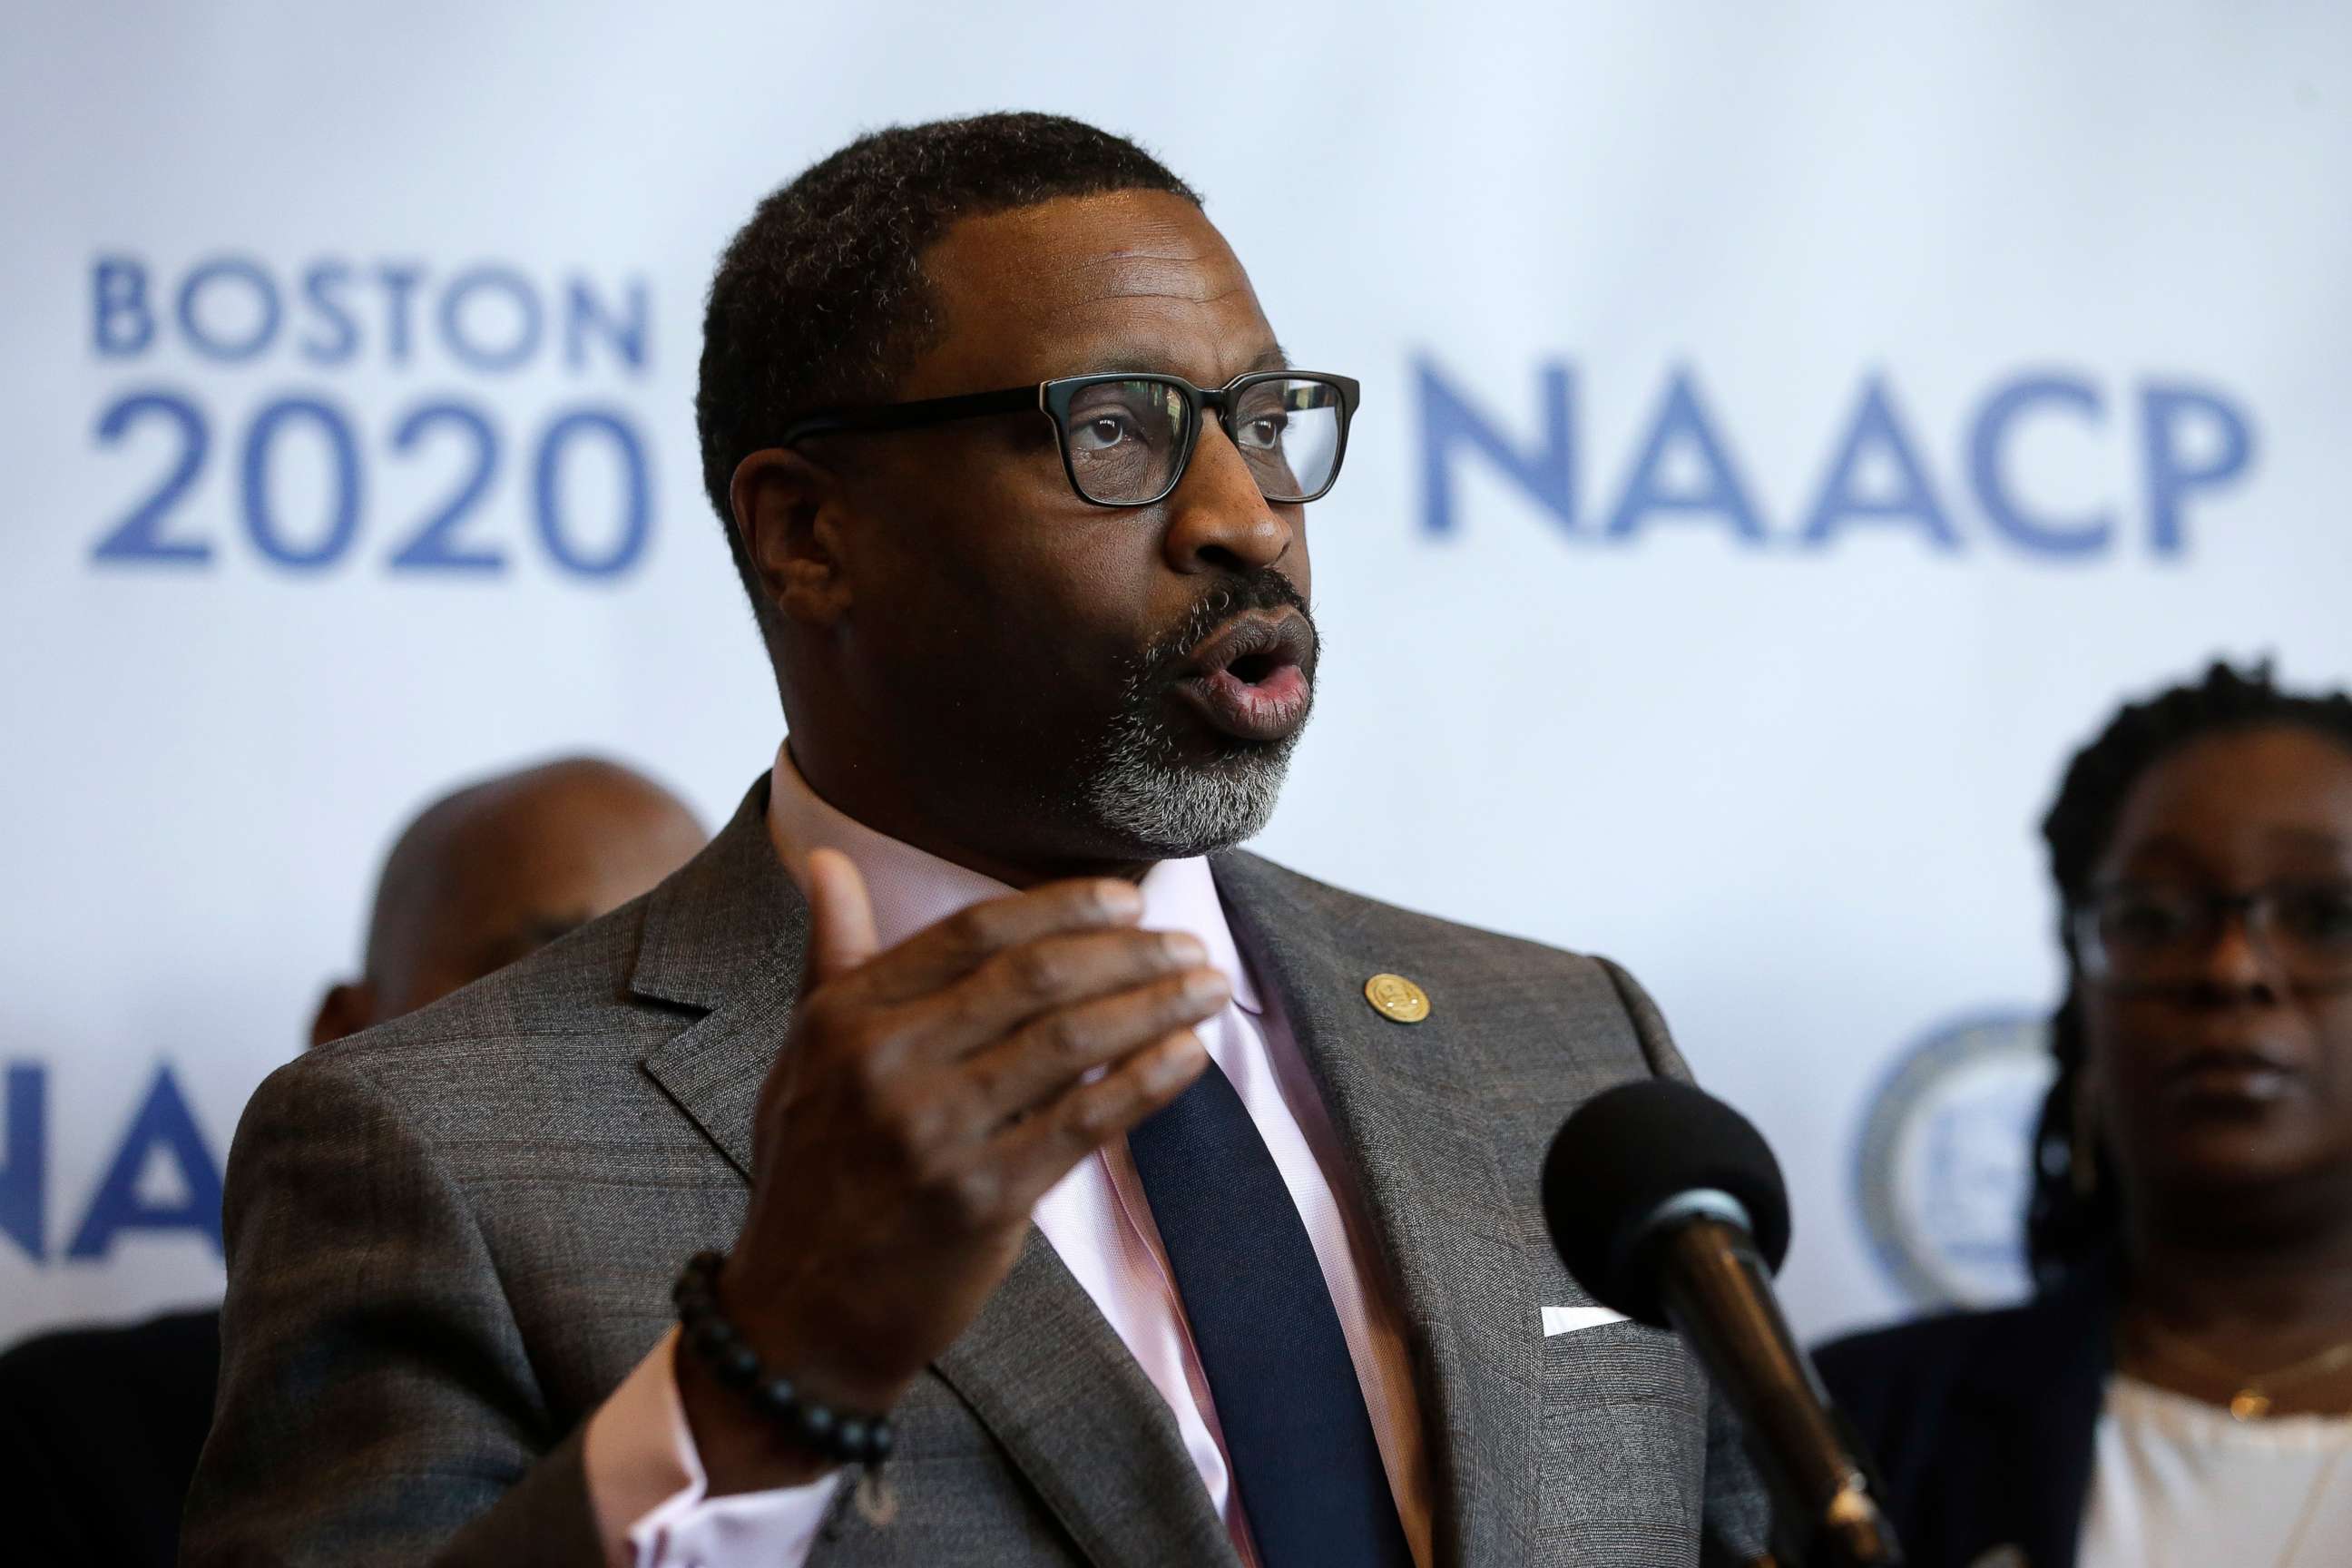 PHOTO: NAACP President Derrick Johnson faces reporters during a news conference in Boston, Dec. 12, 2019.